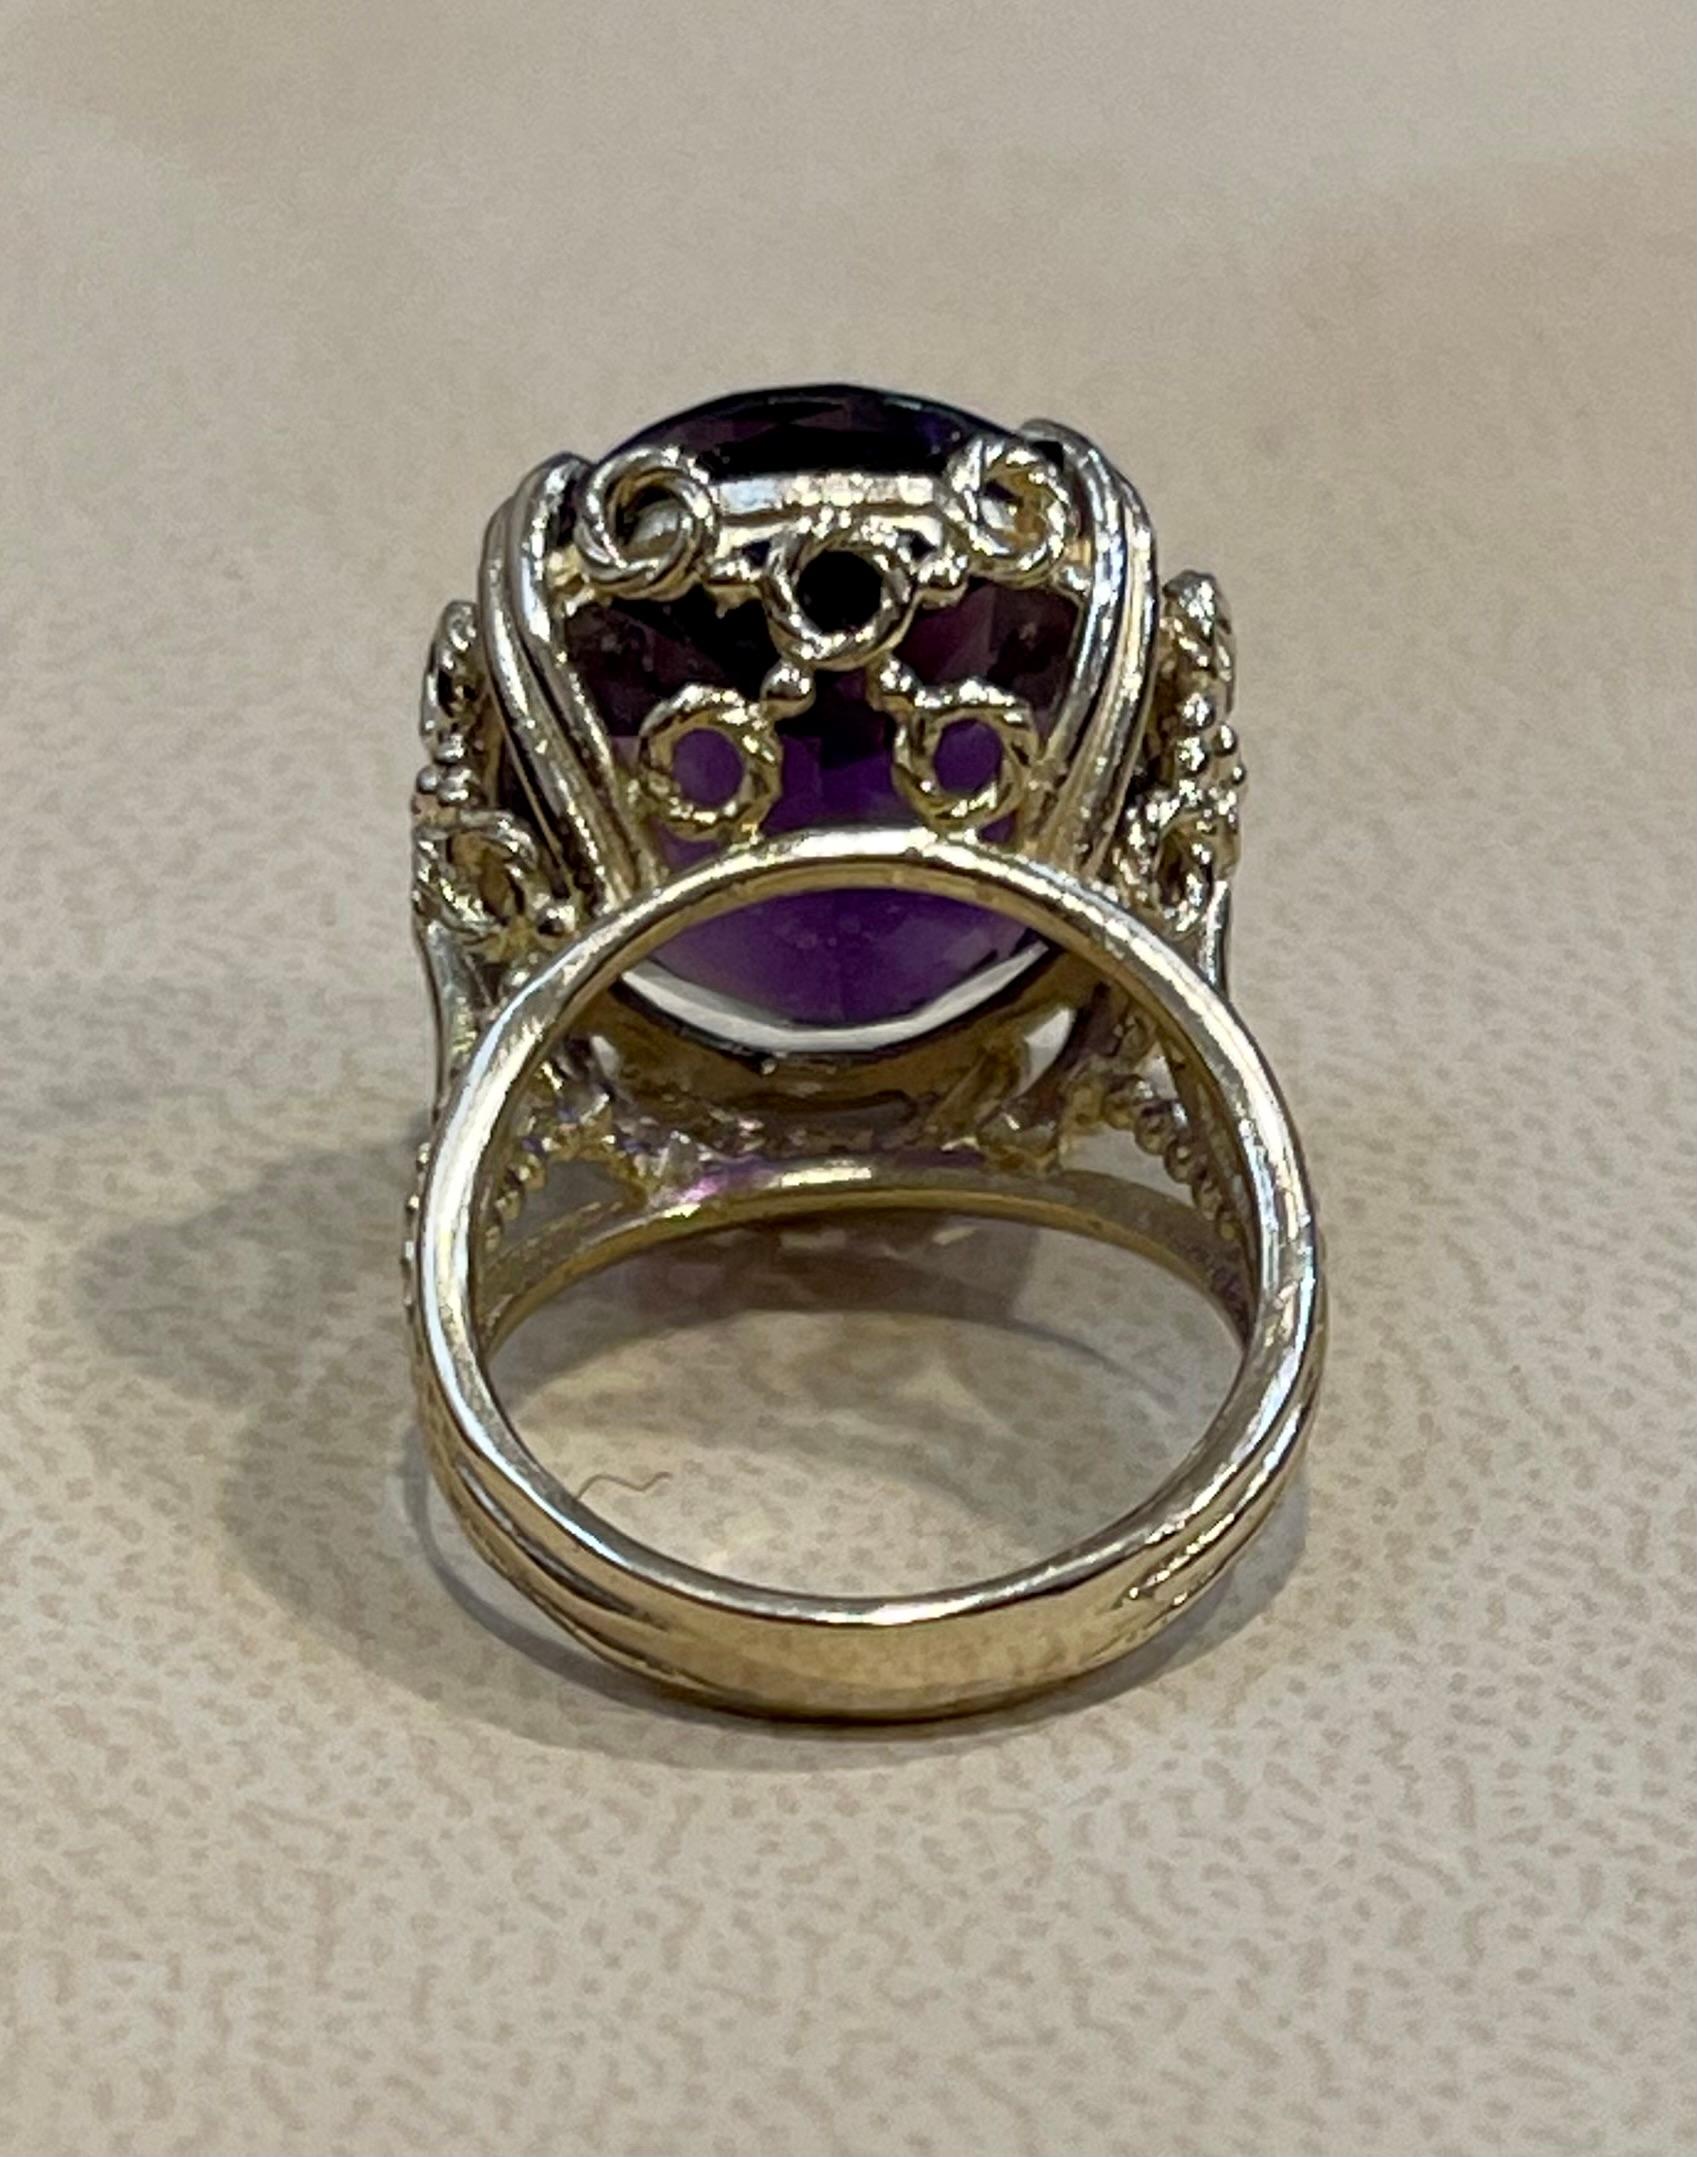 13 Carat Oval Bolivian Amethyst Cocktail Ring in 14 Karat Yellow Gold In Excellent Condition For Sale In New York, NY